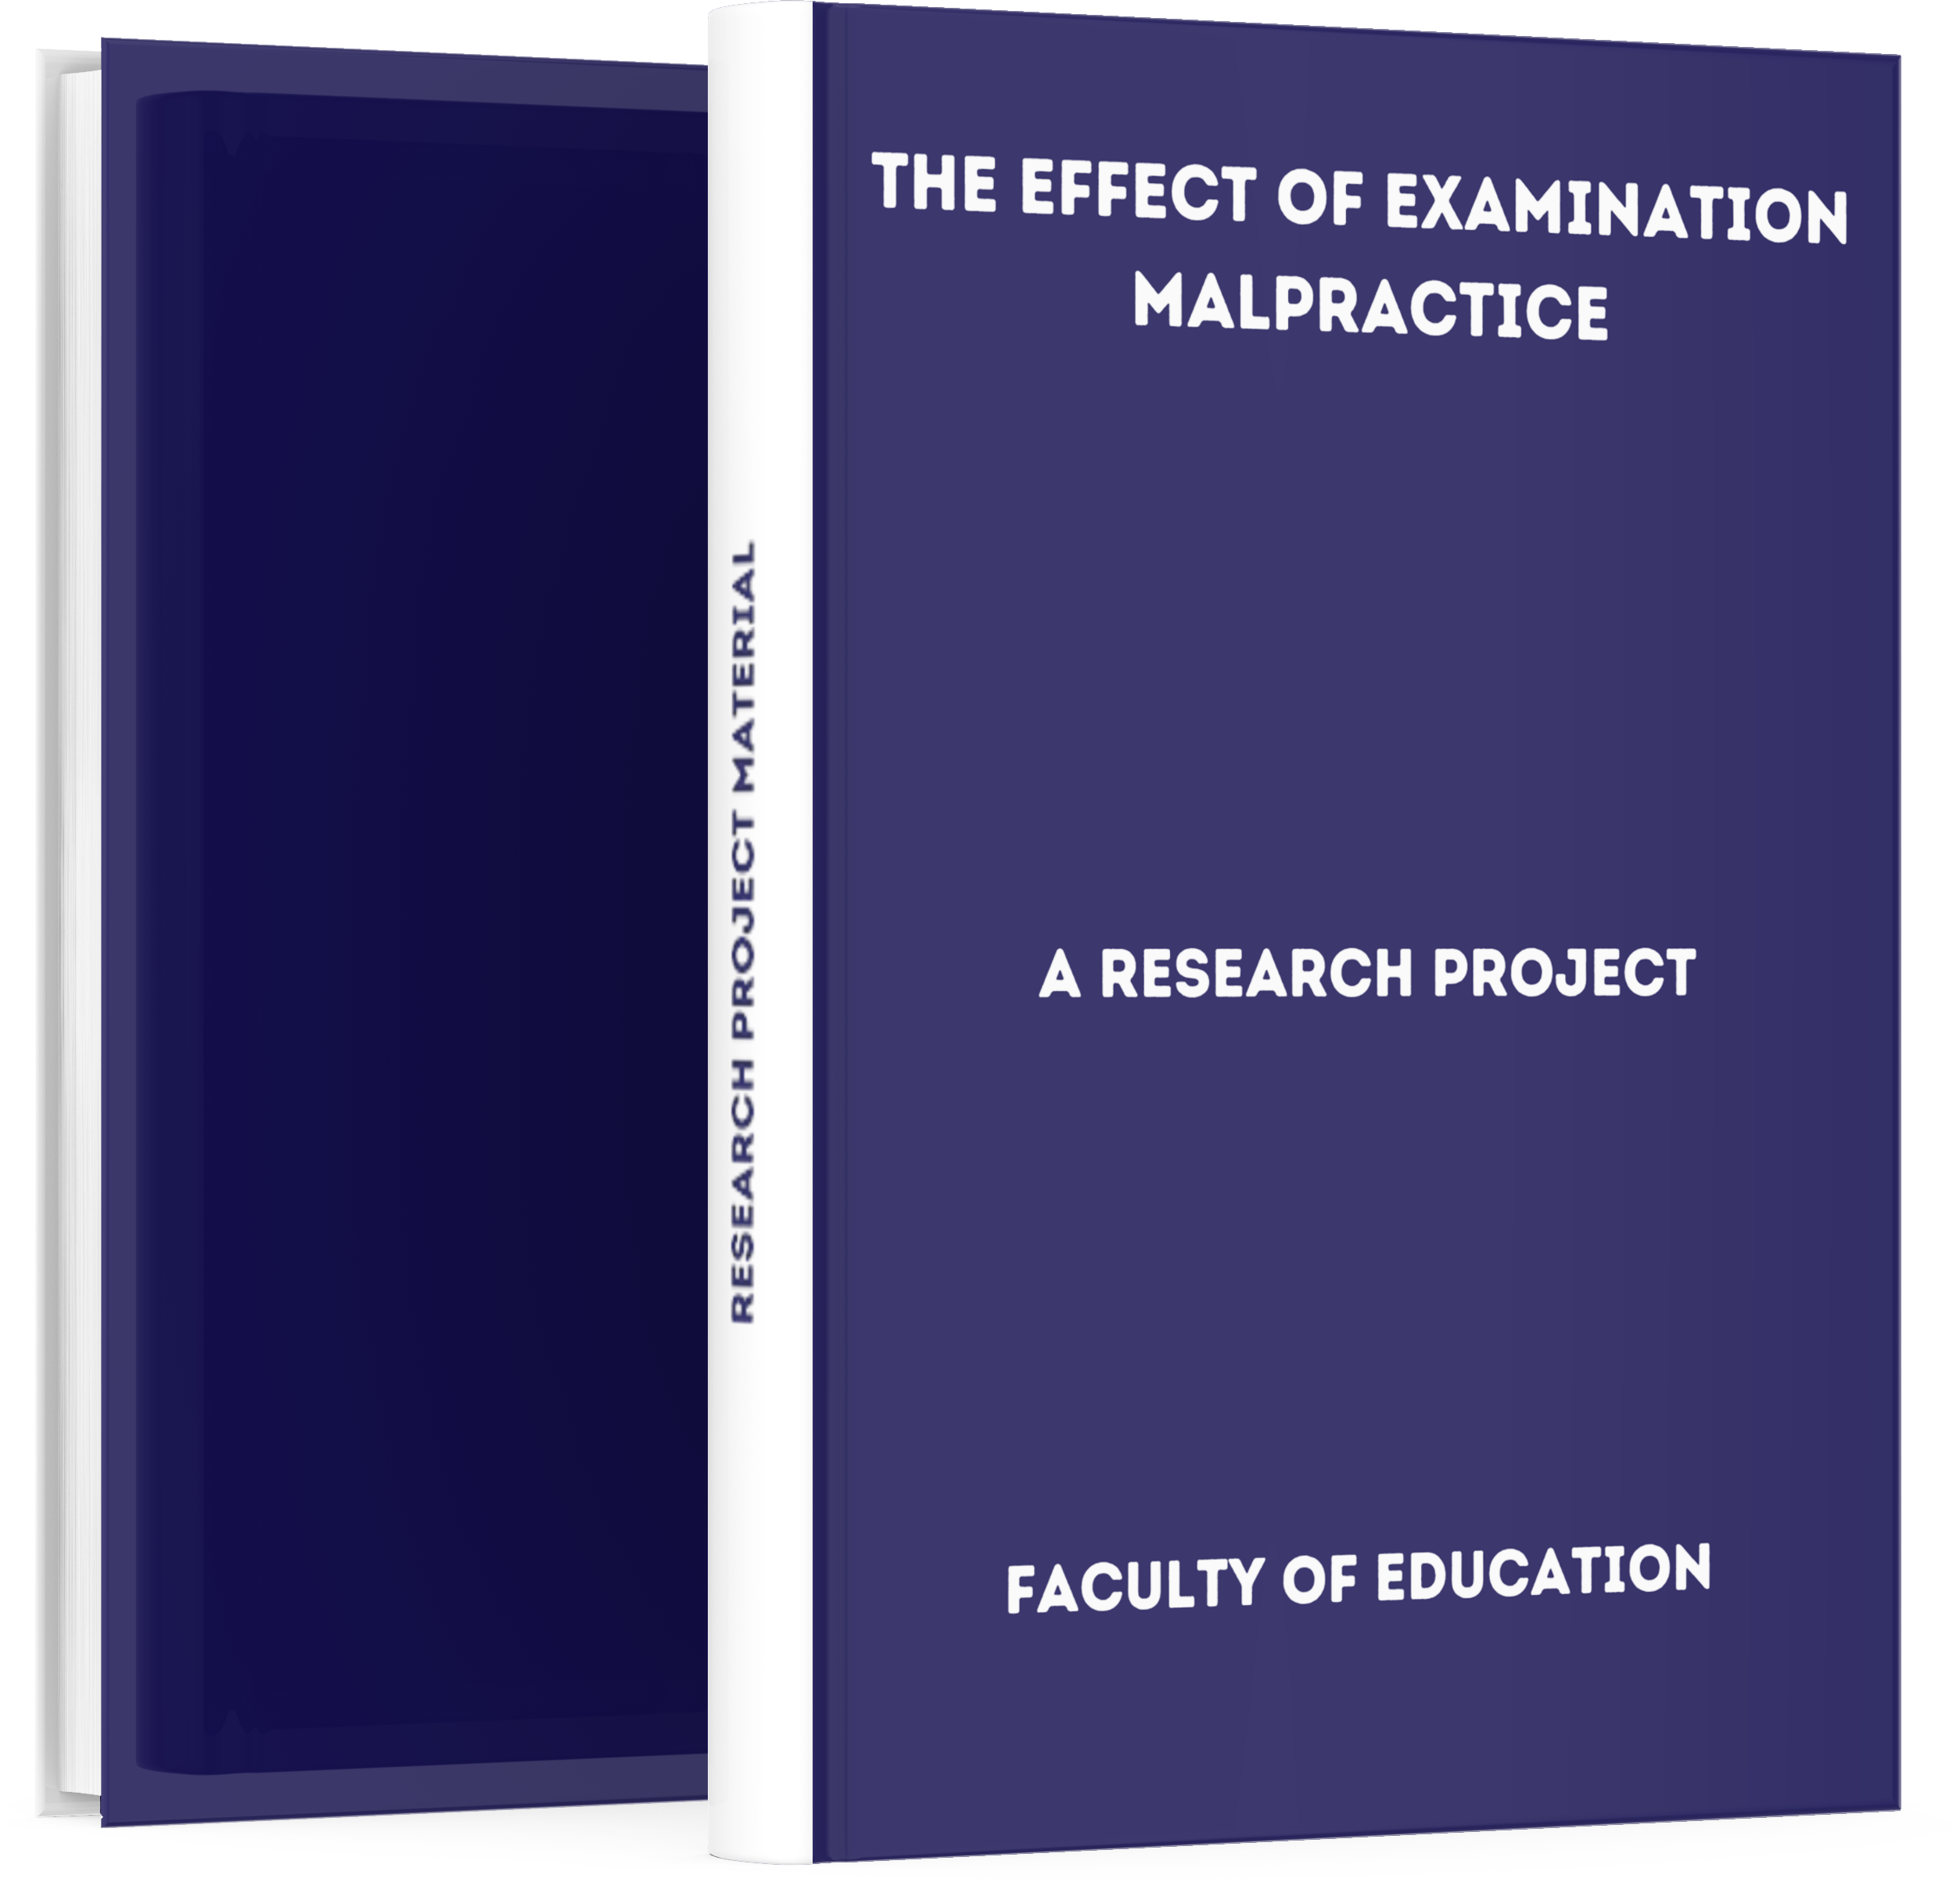 write an essay on the topic causes of examination malpractice